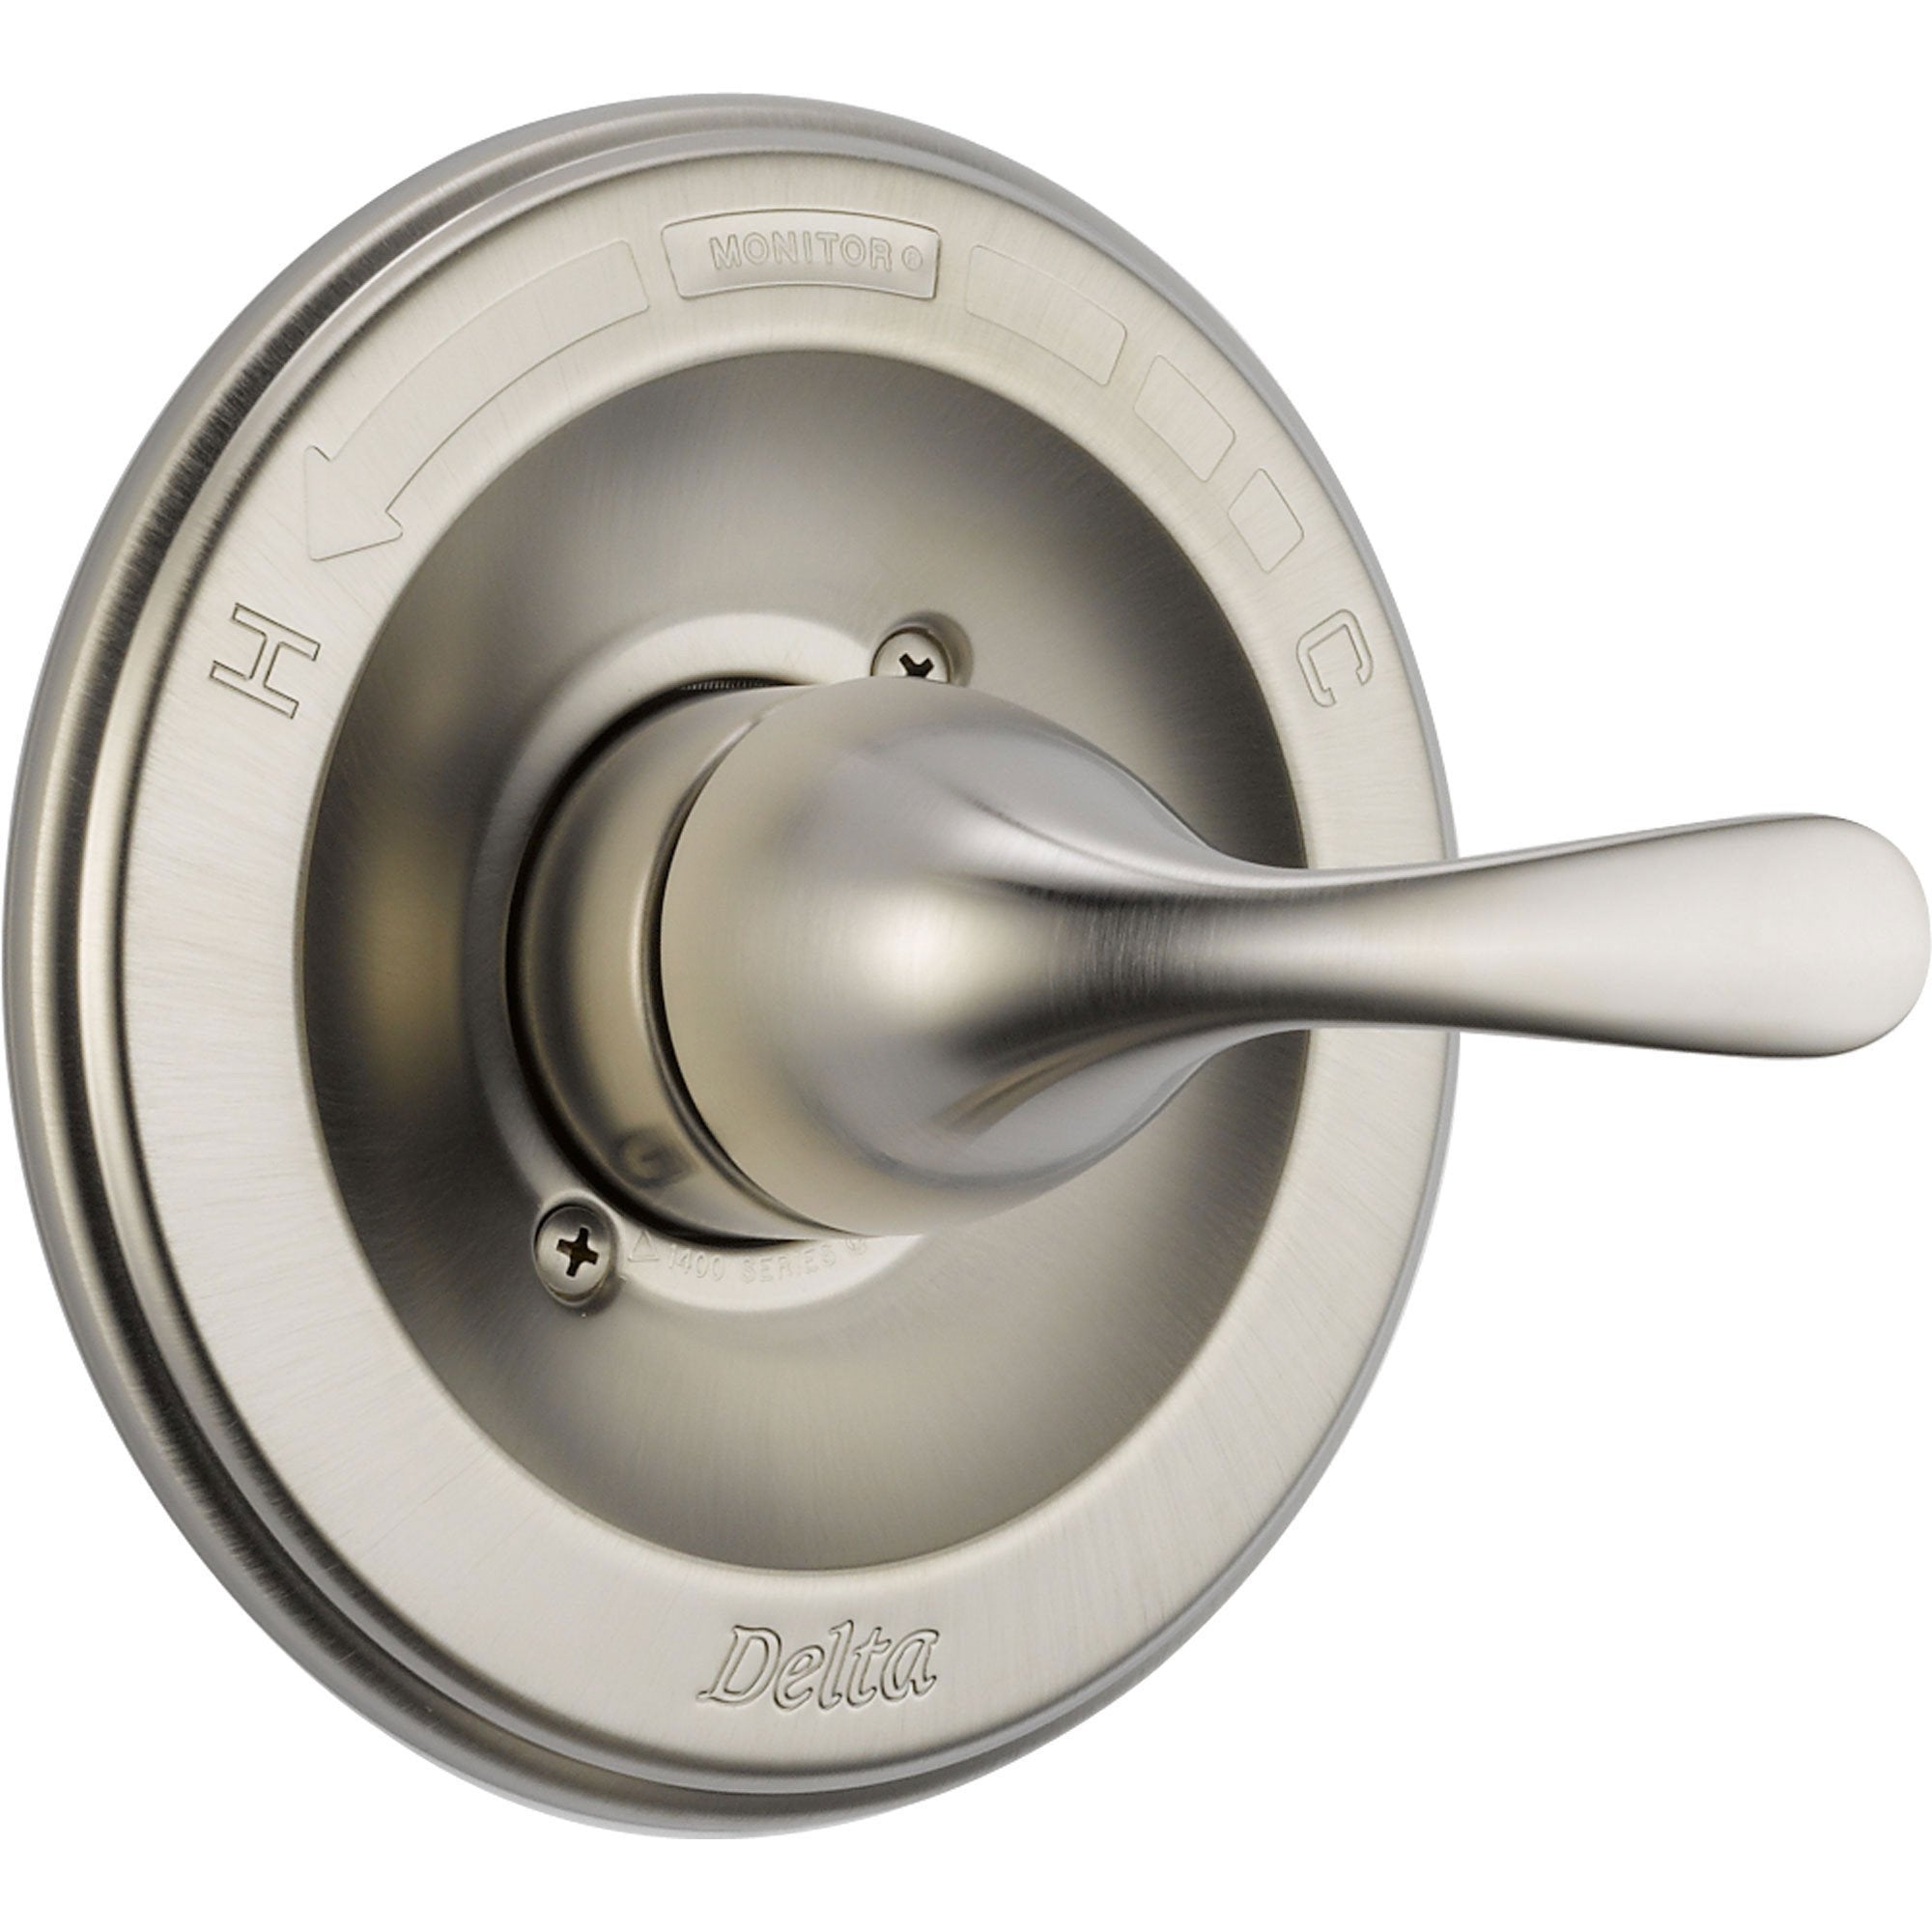 Delta Classic Stainless Steel Finish Shower Control with Valve Included D074V